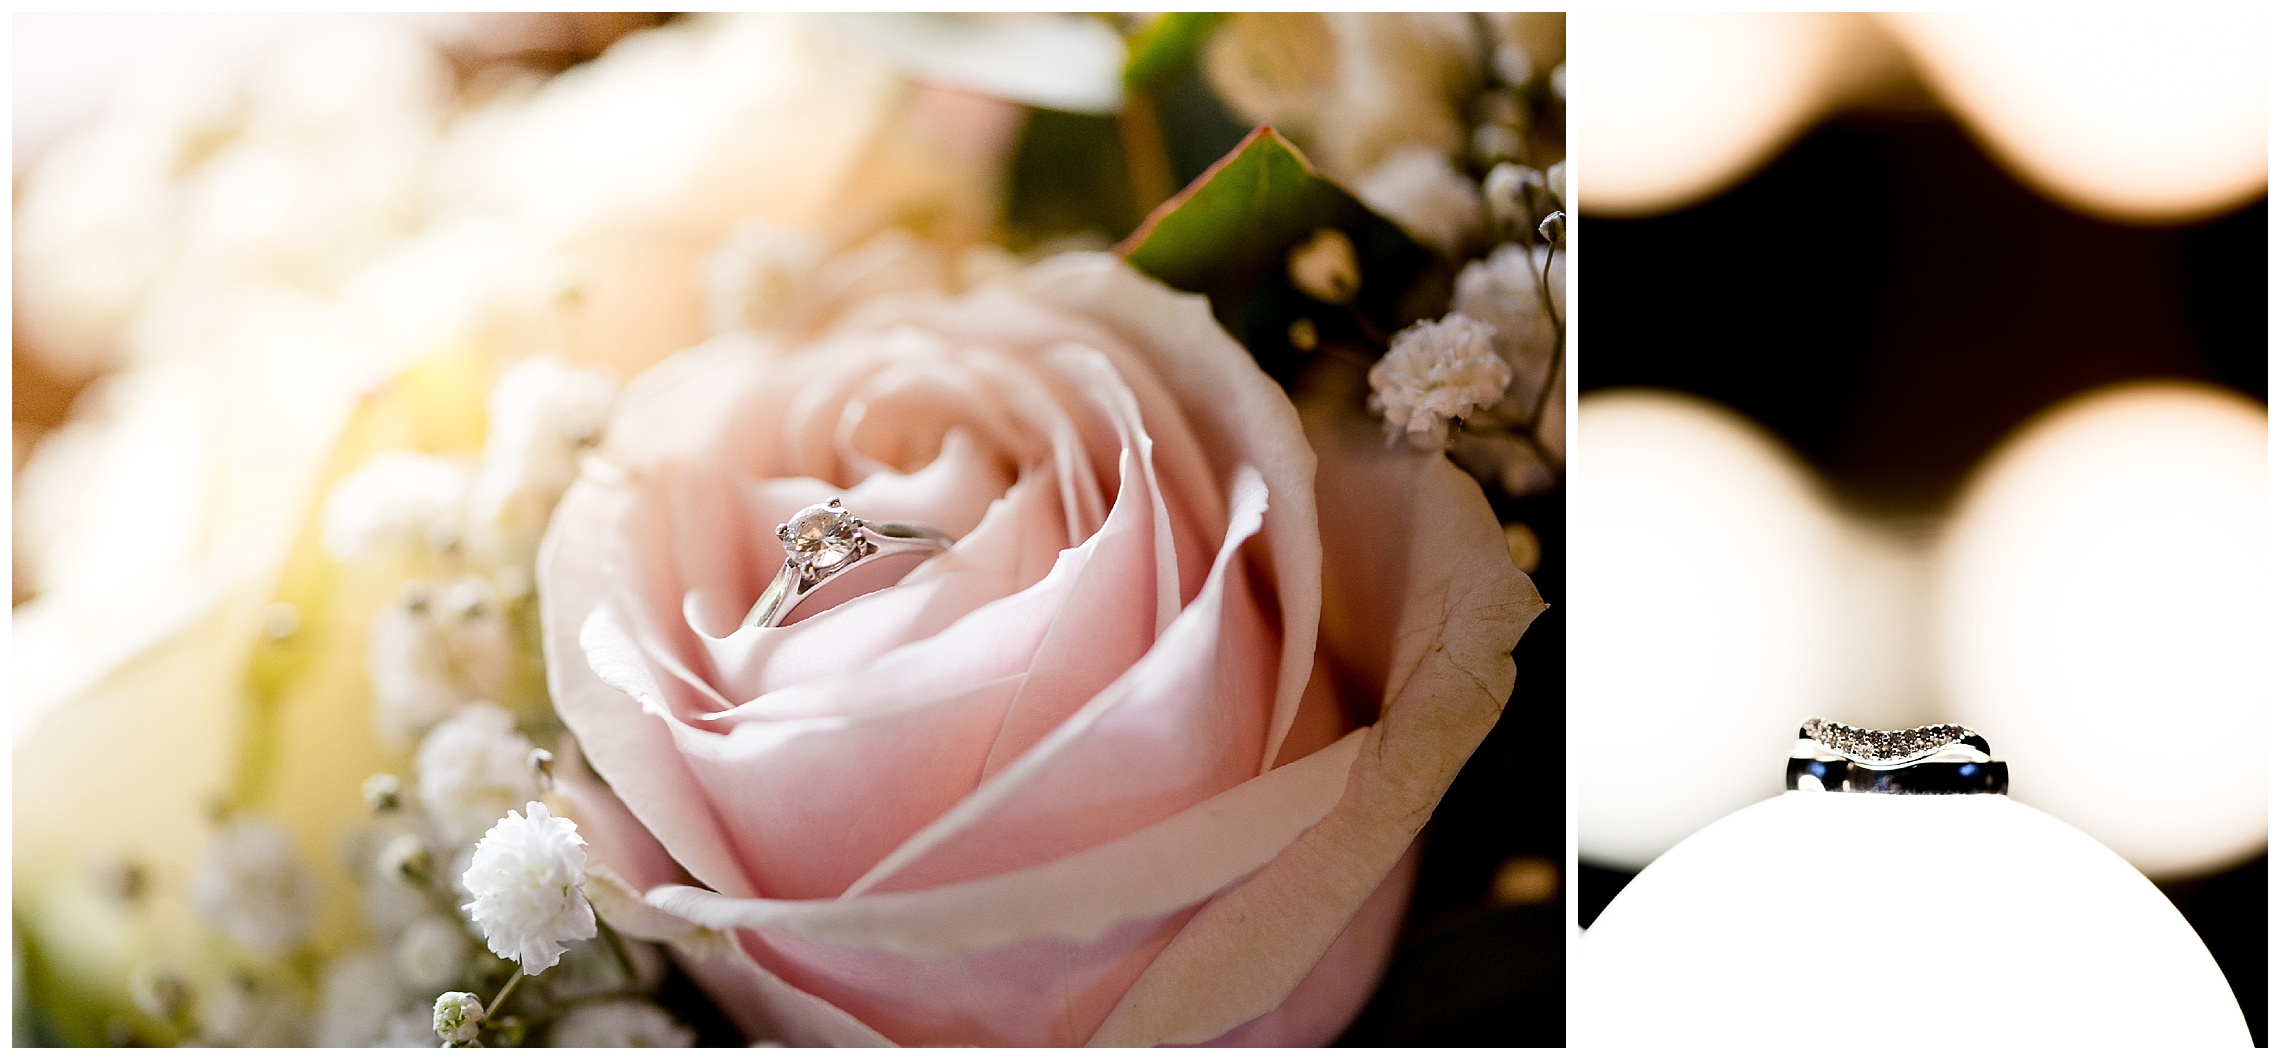 wedding rings and engagement ring in flowers